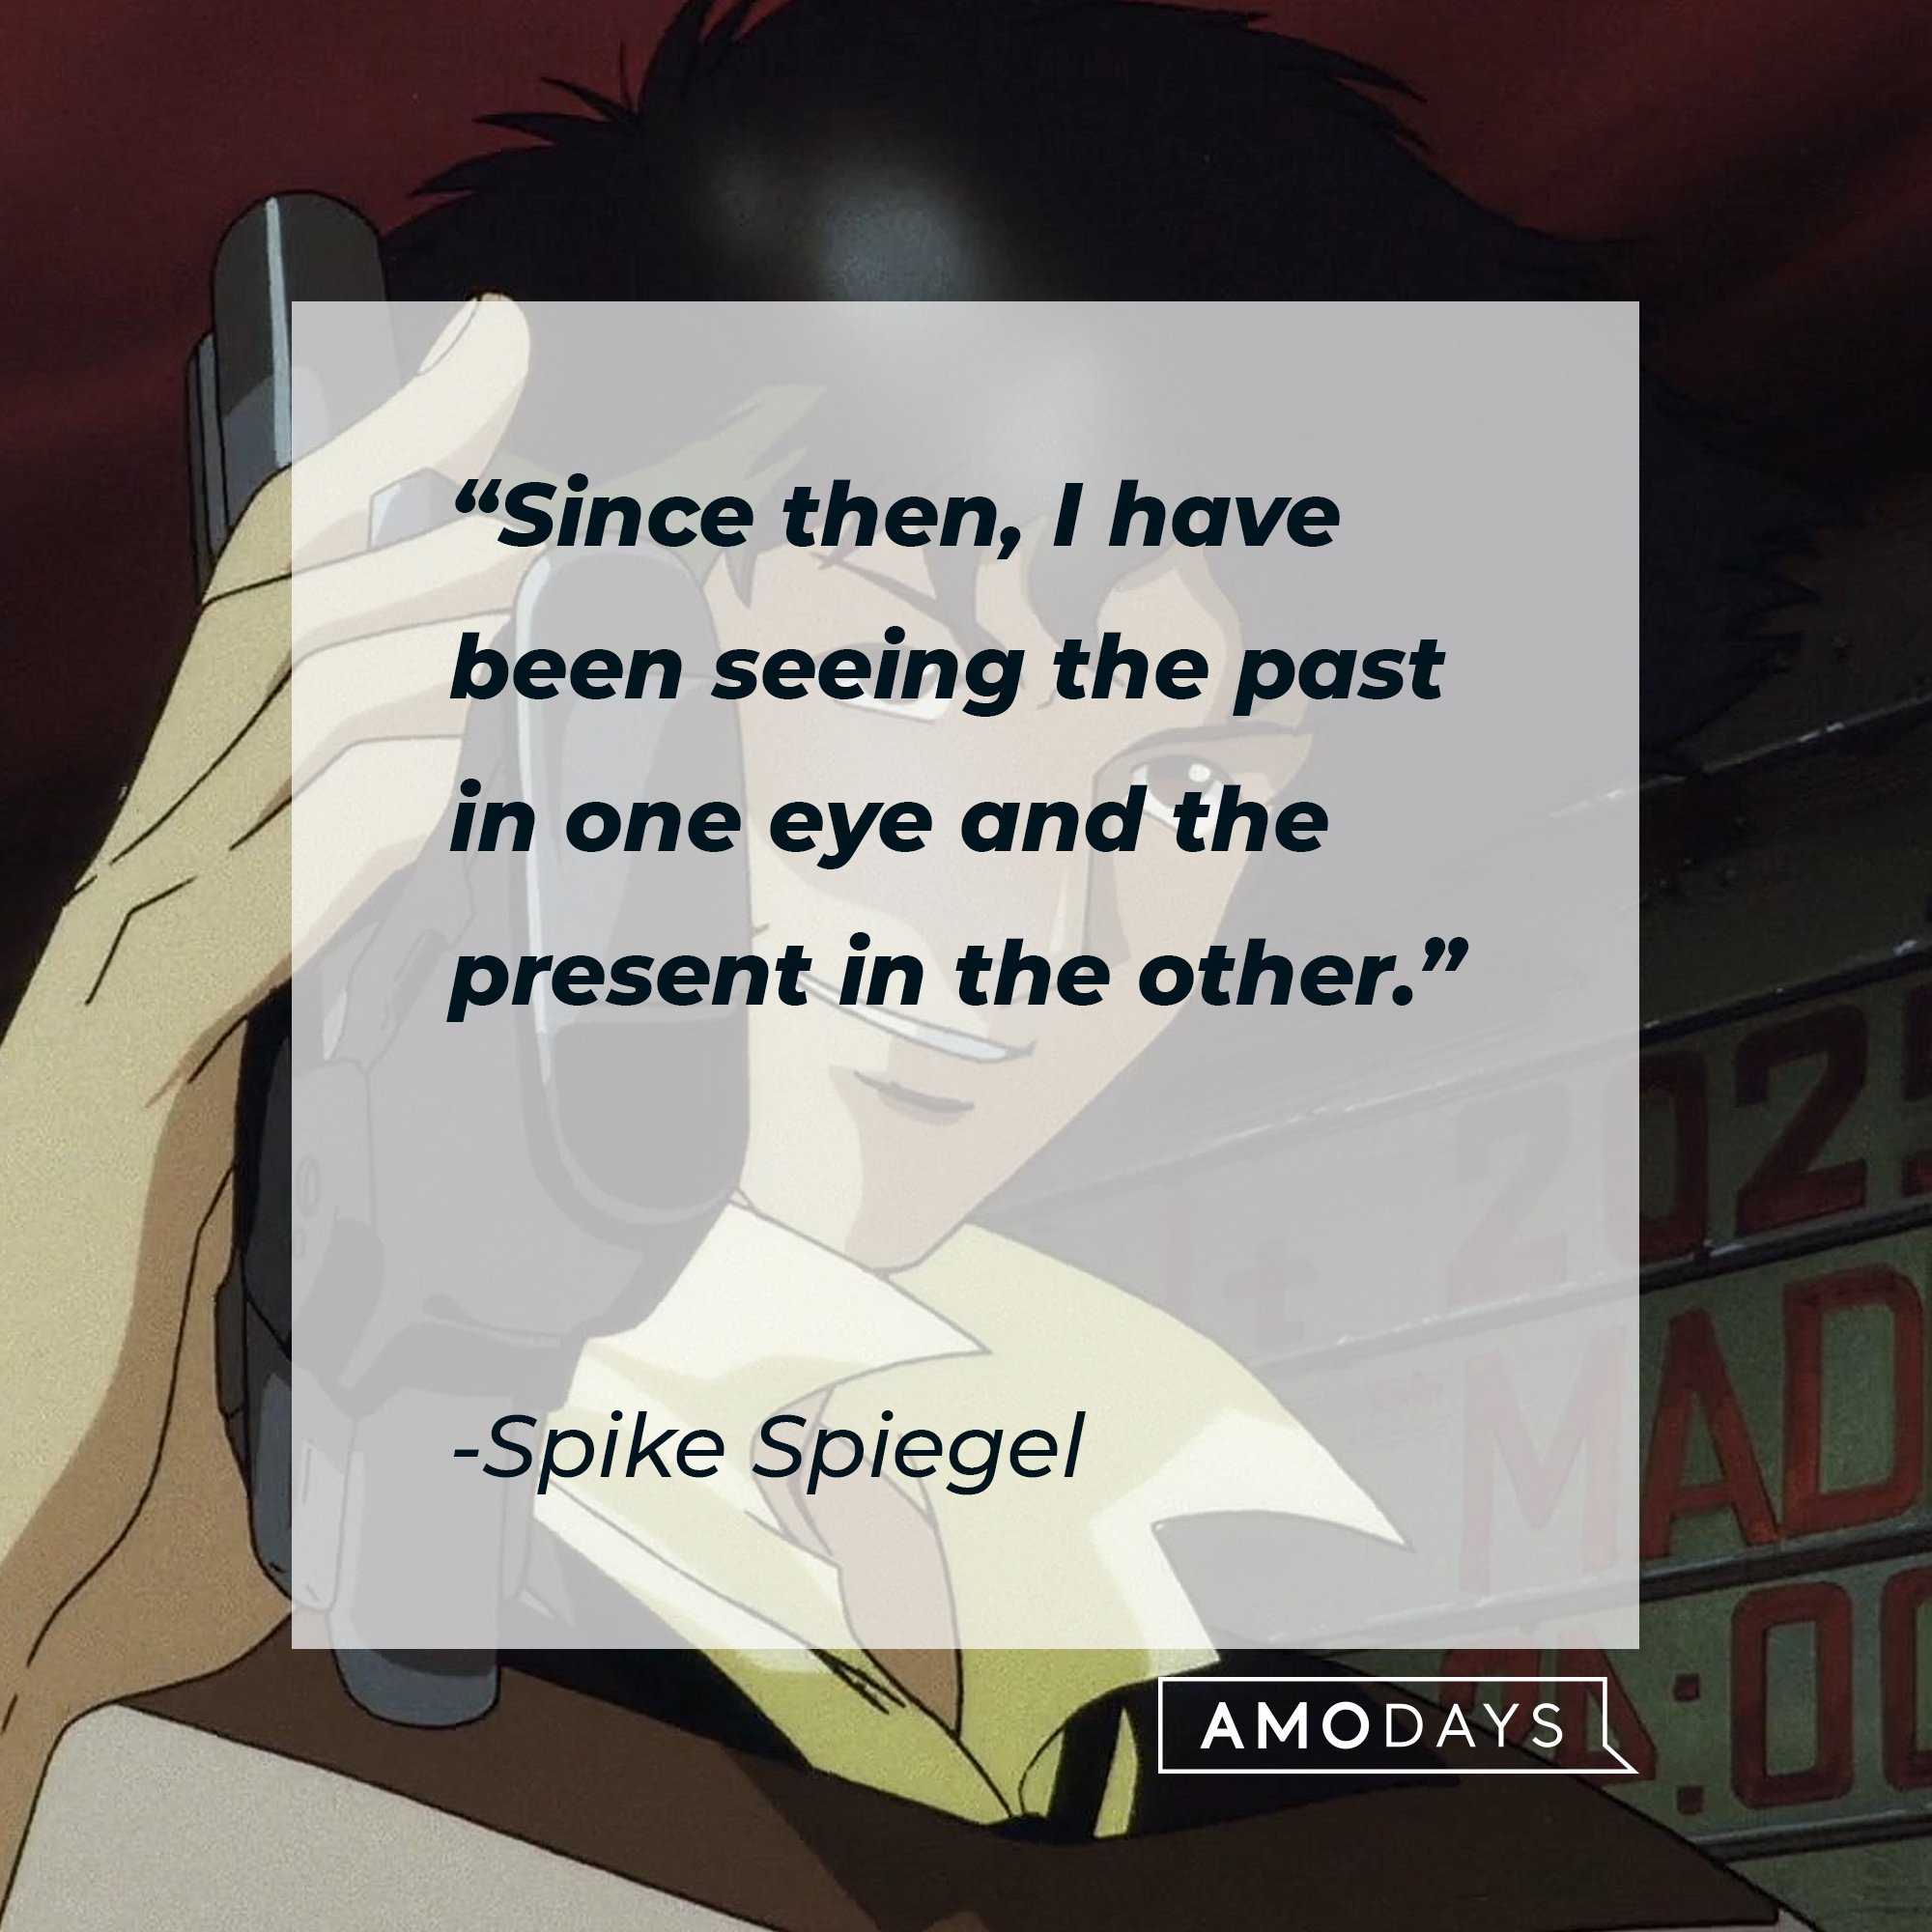 Spike Spiegel's quote:  "Since then, I have been seeing the past in one eye and the present in the other." | Image: AmoDays 